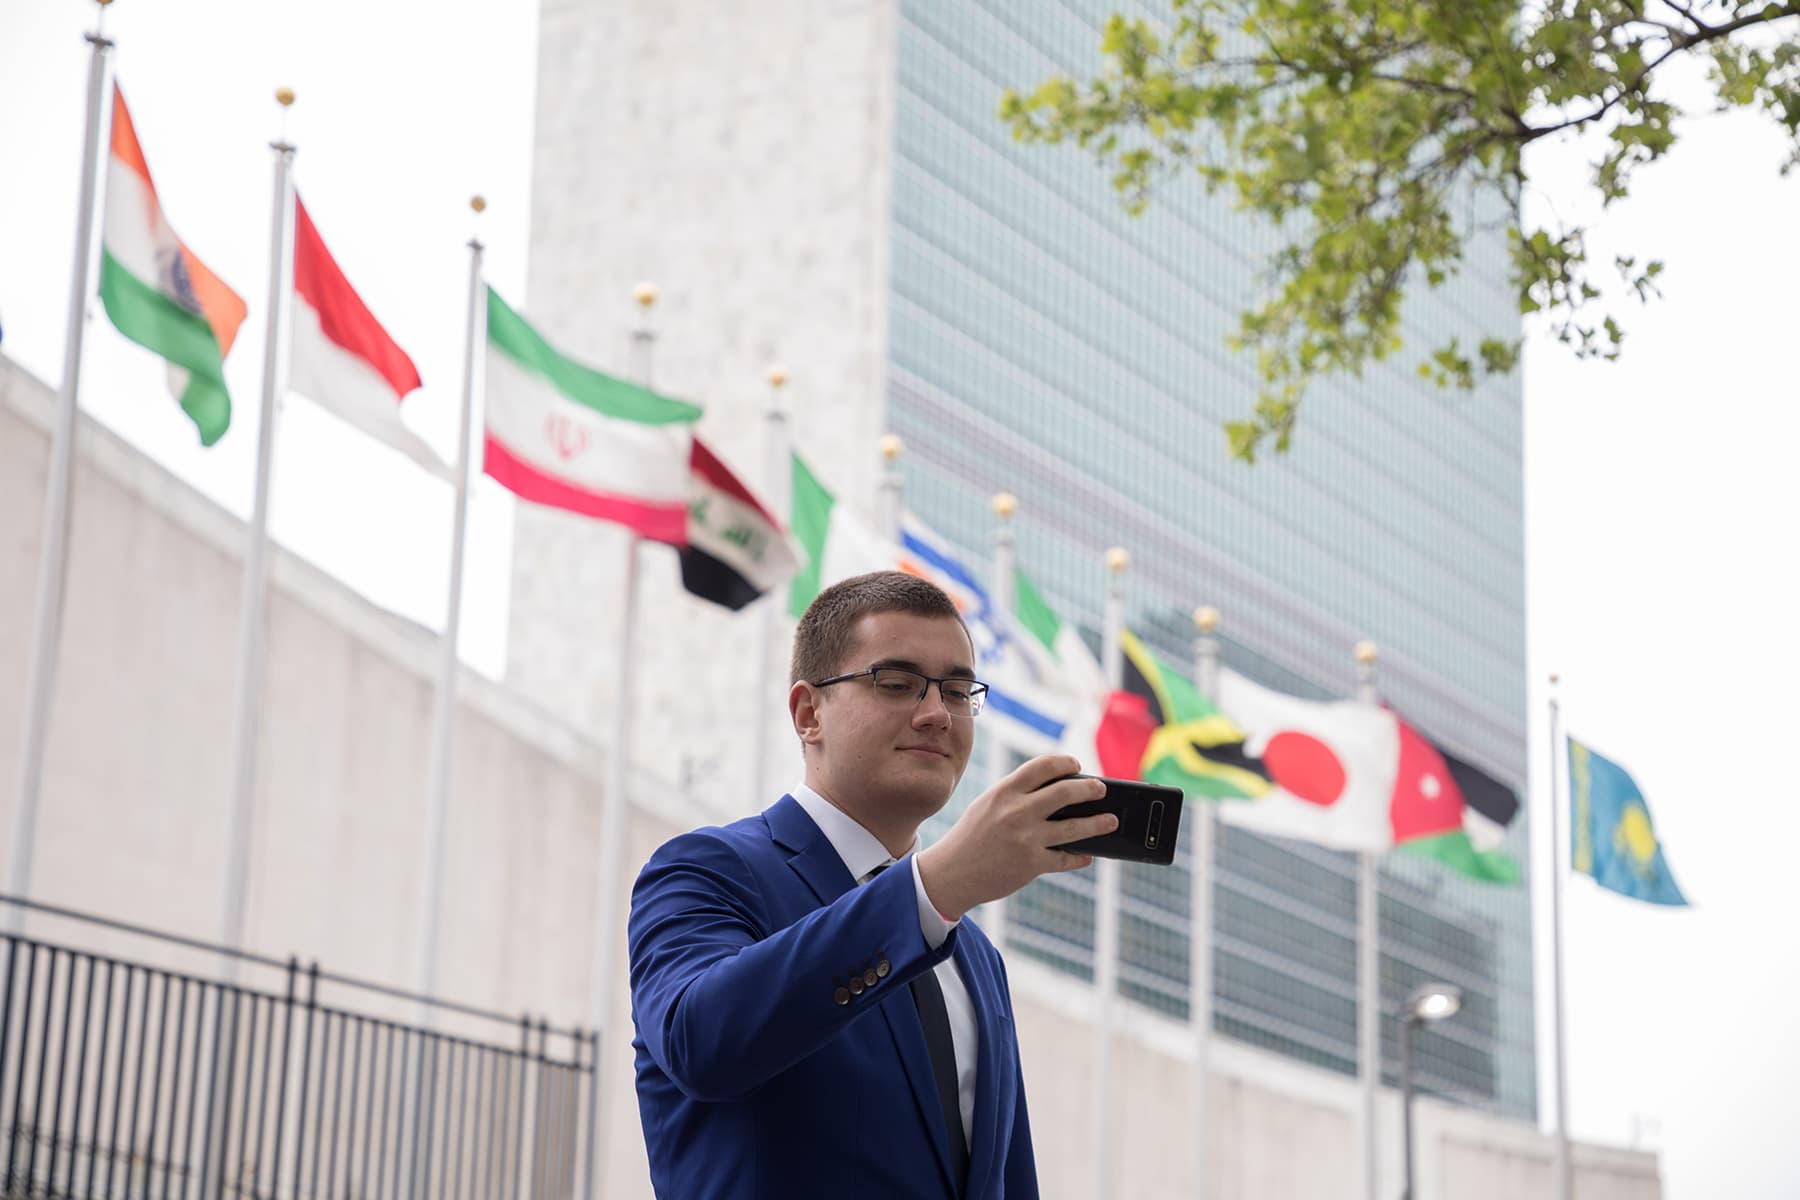 A young man in glasses and a blue suit takes a selfie in front of international flags.